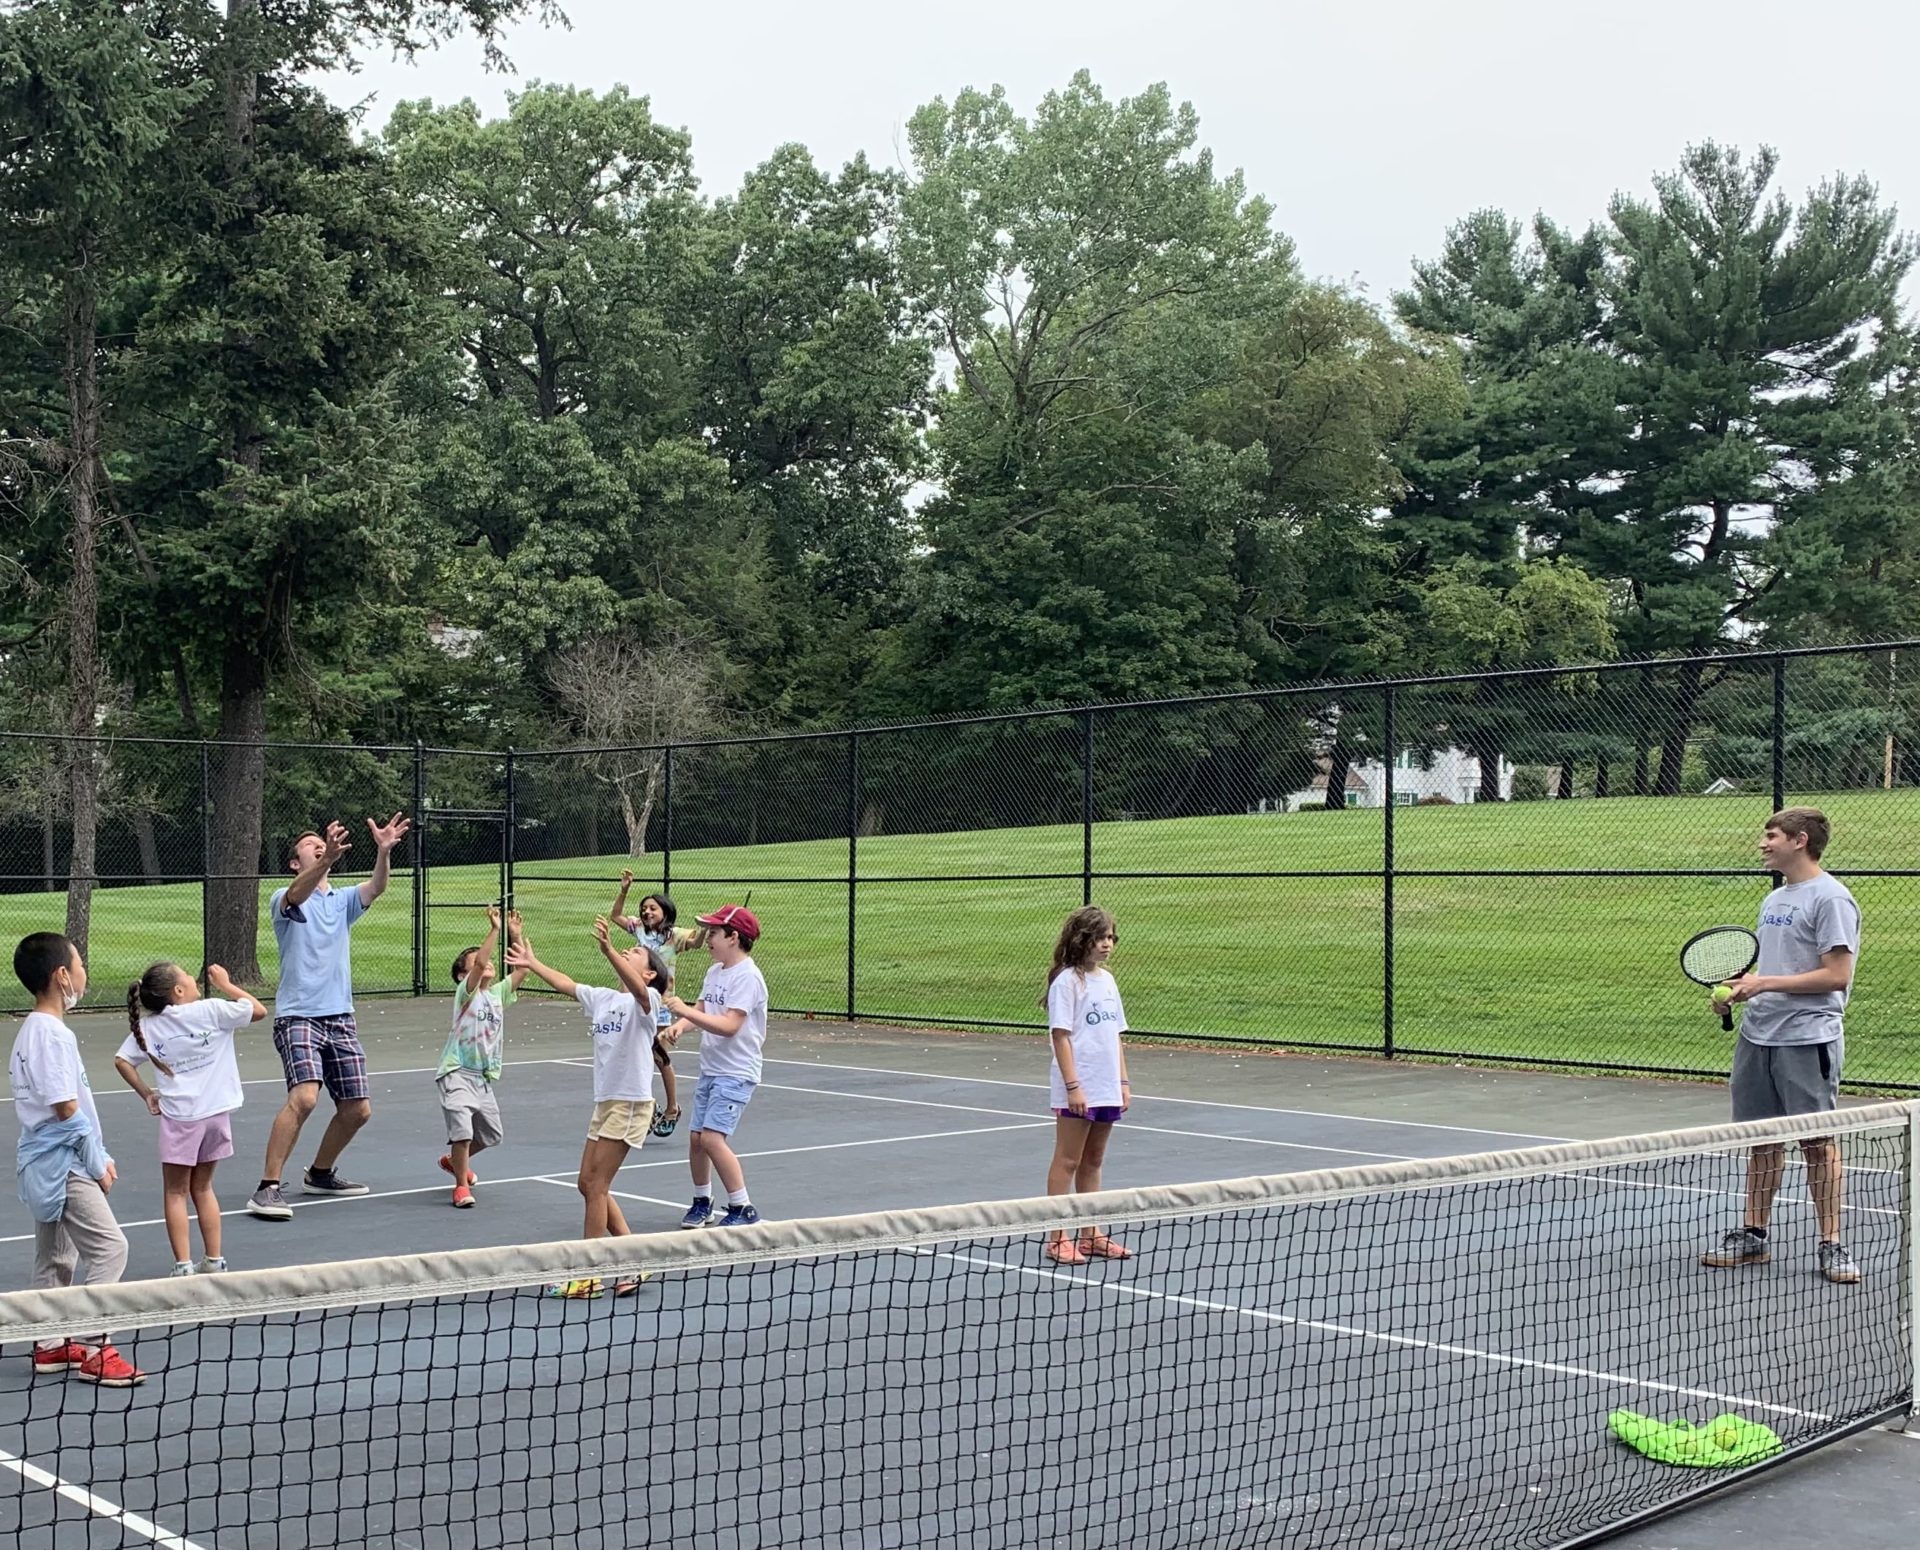 Campers playing on tennis court